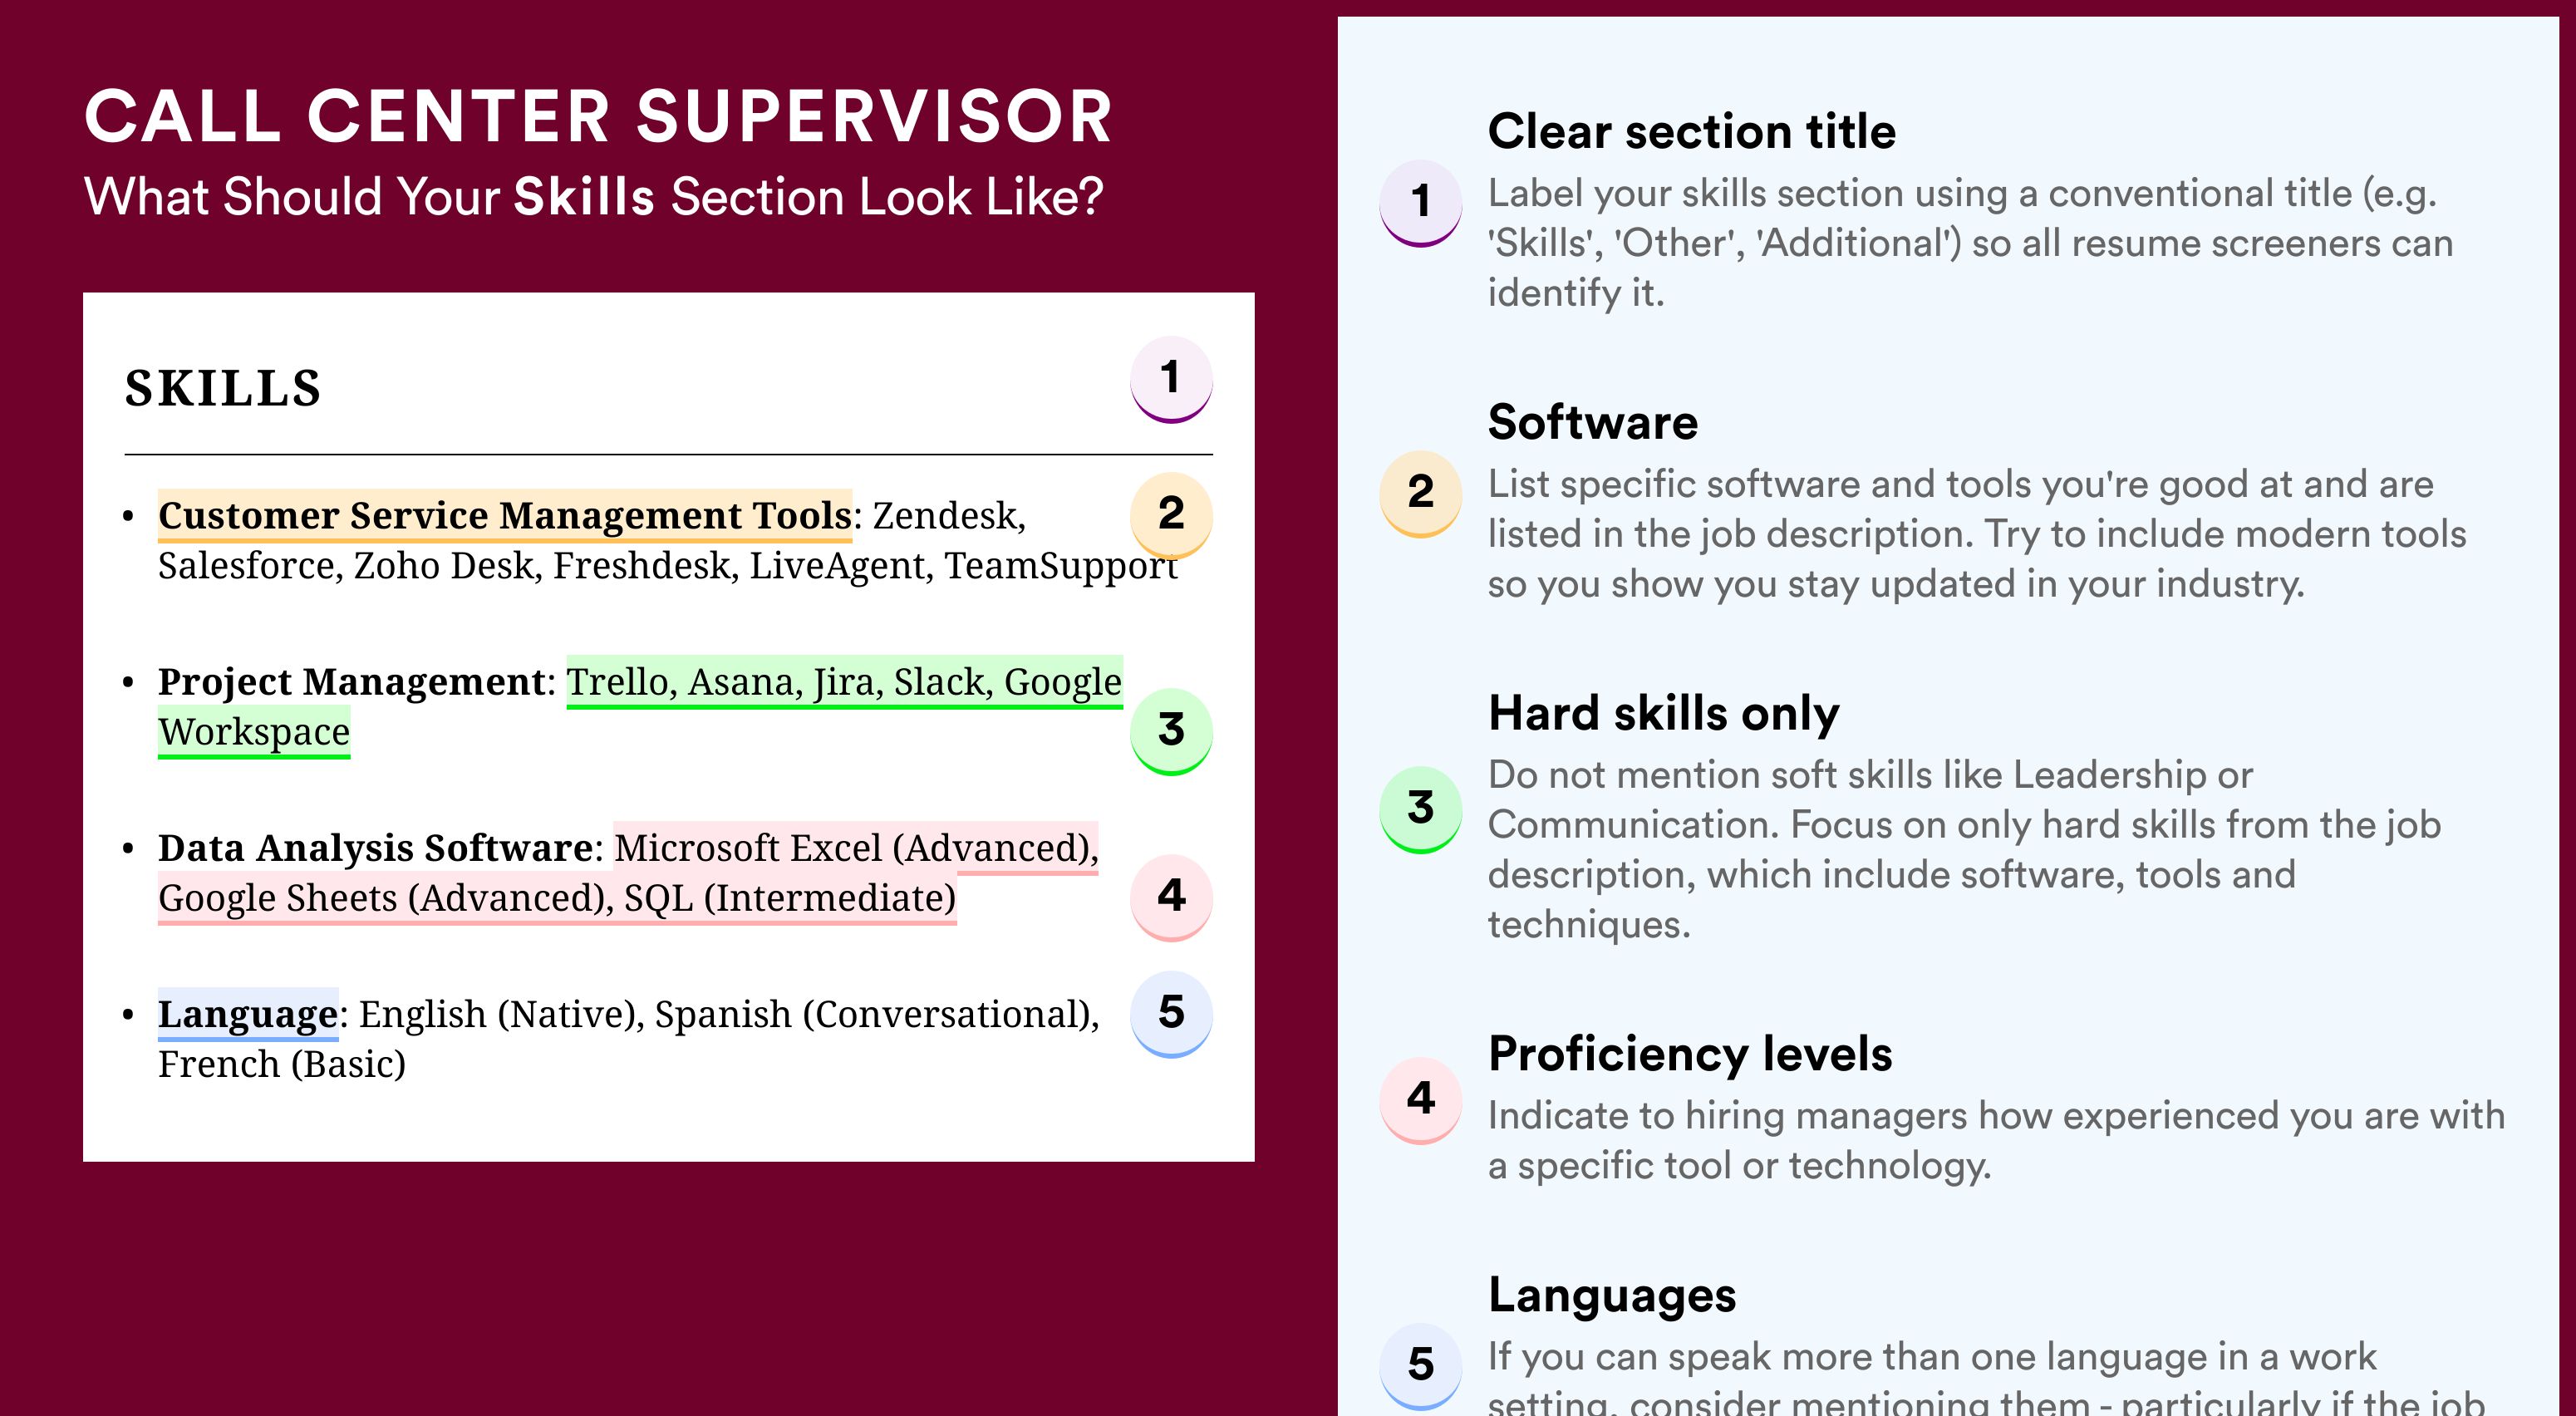 How To Write Your Skills Section - Call Center Supervisor Roles